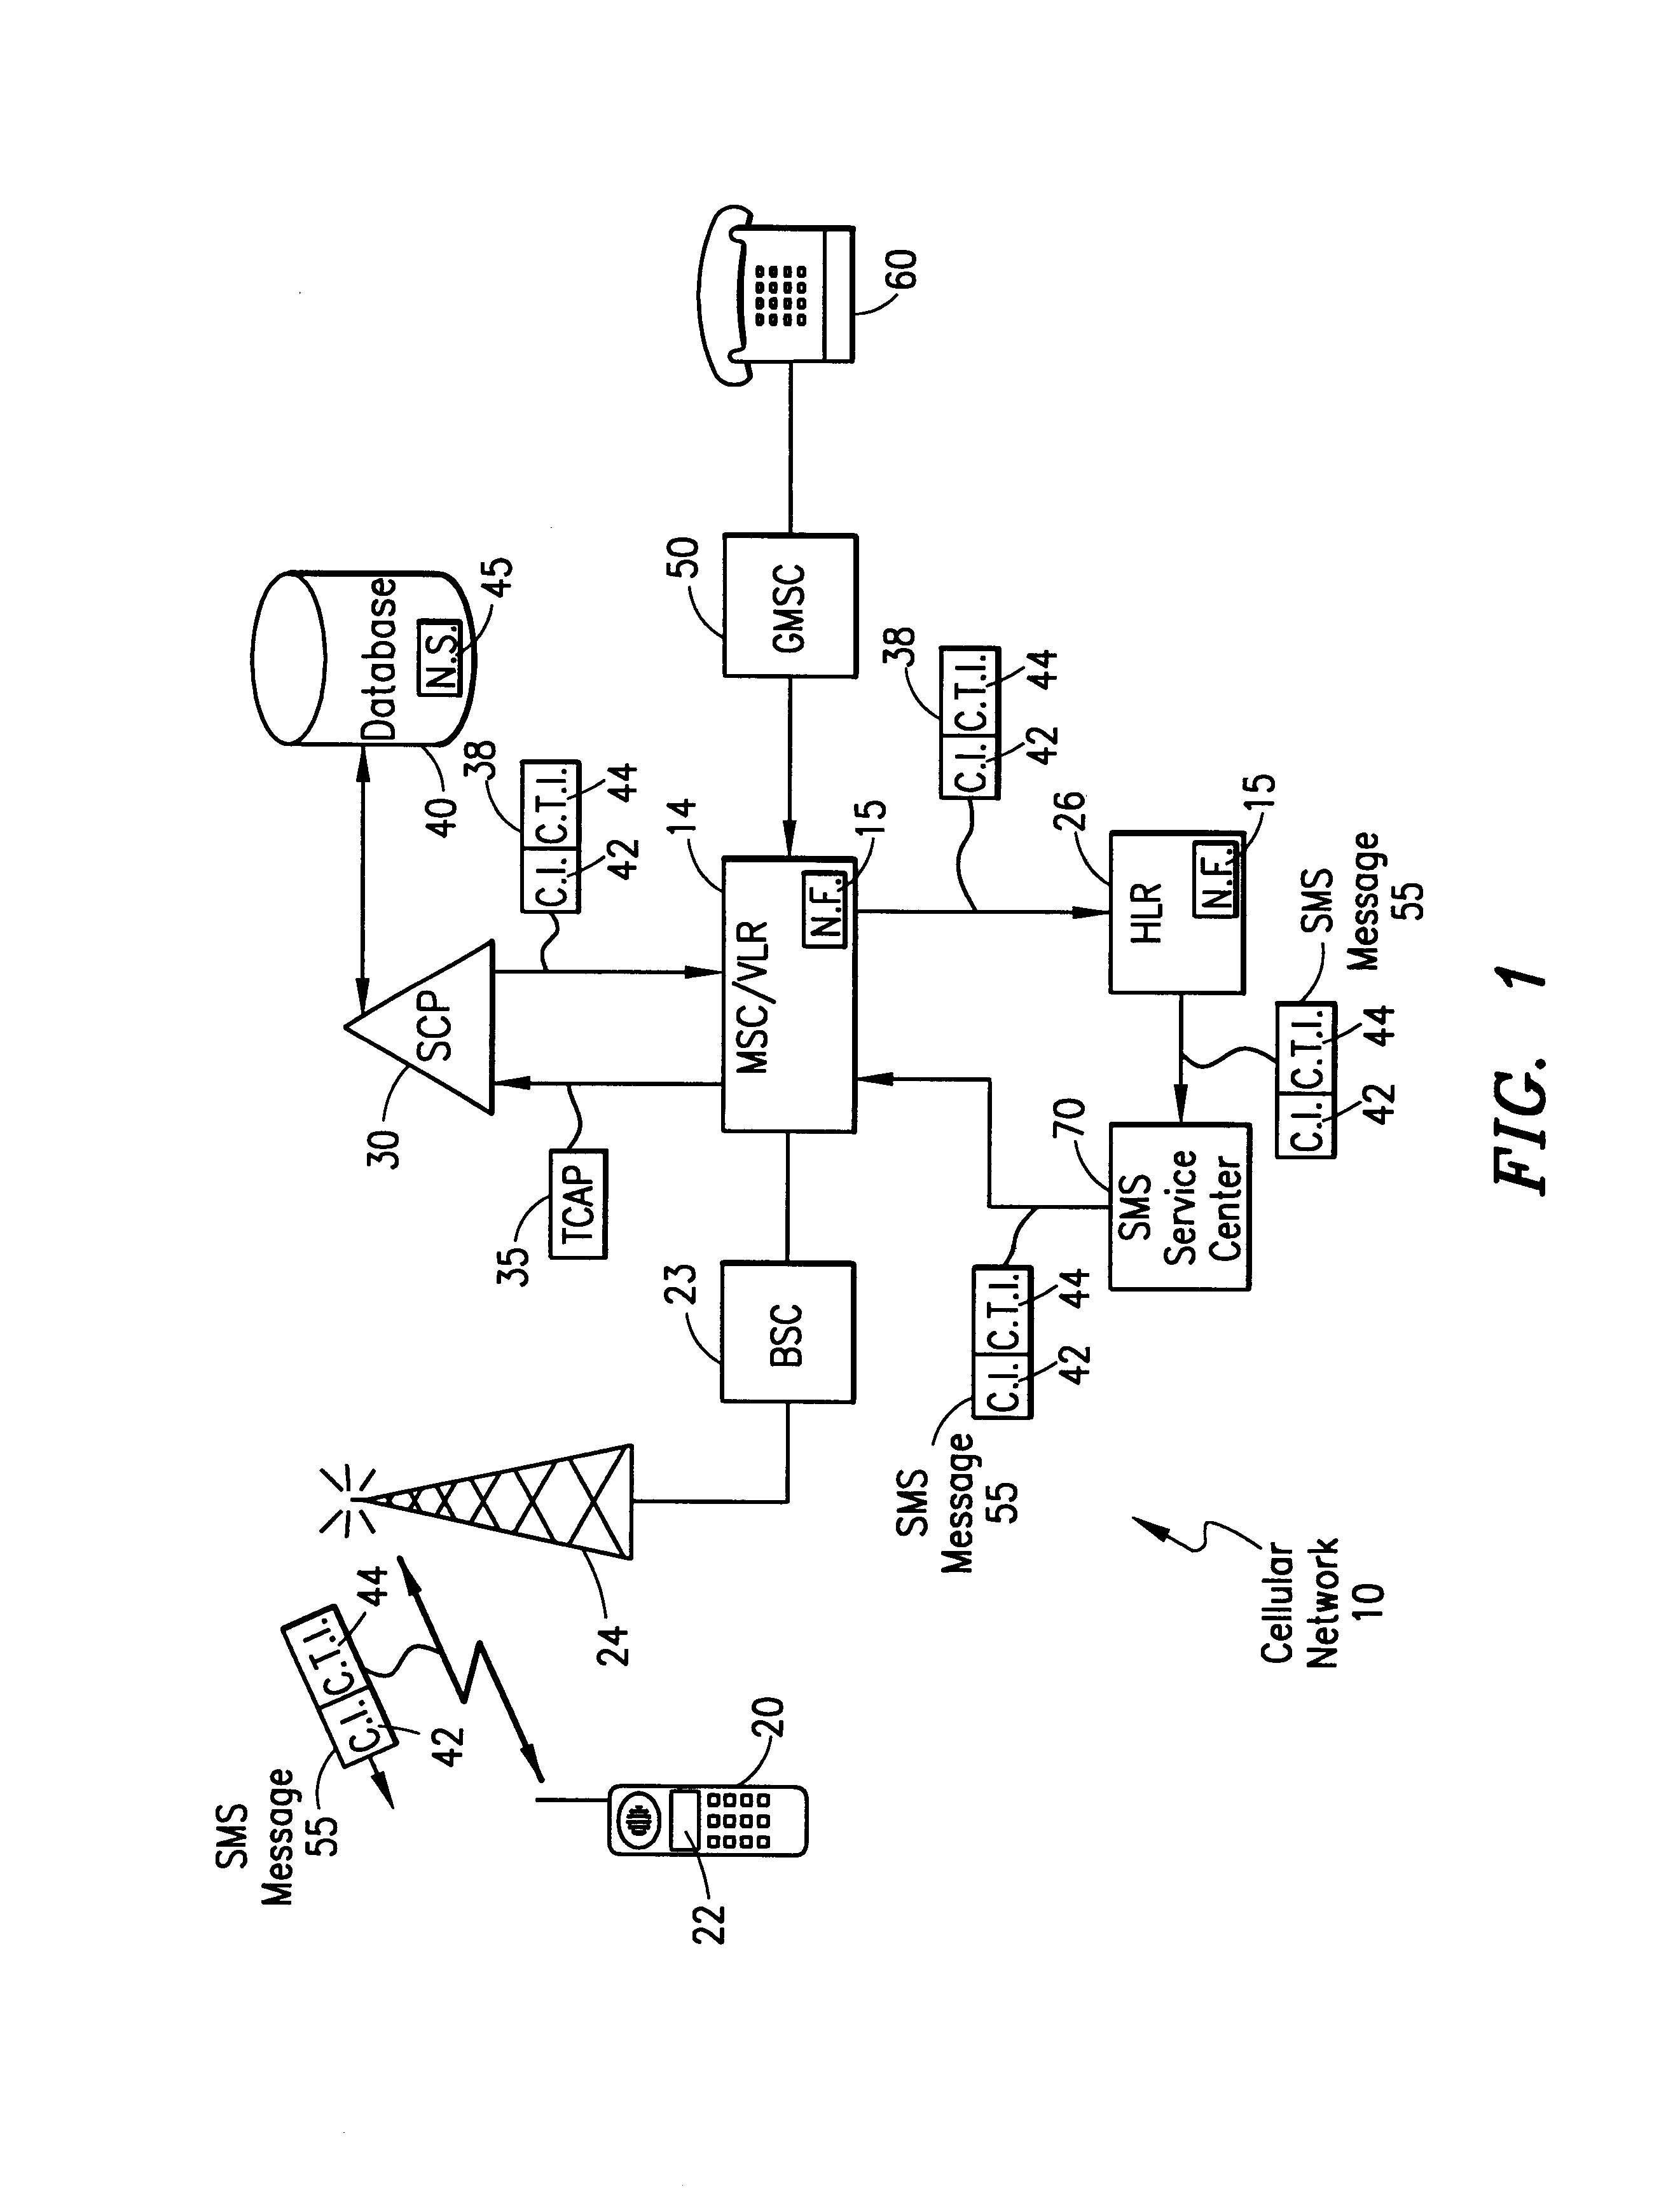 System and method to notify subscribers of call terminating treatment